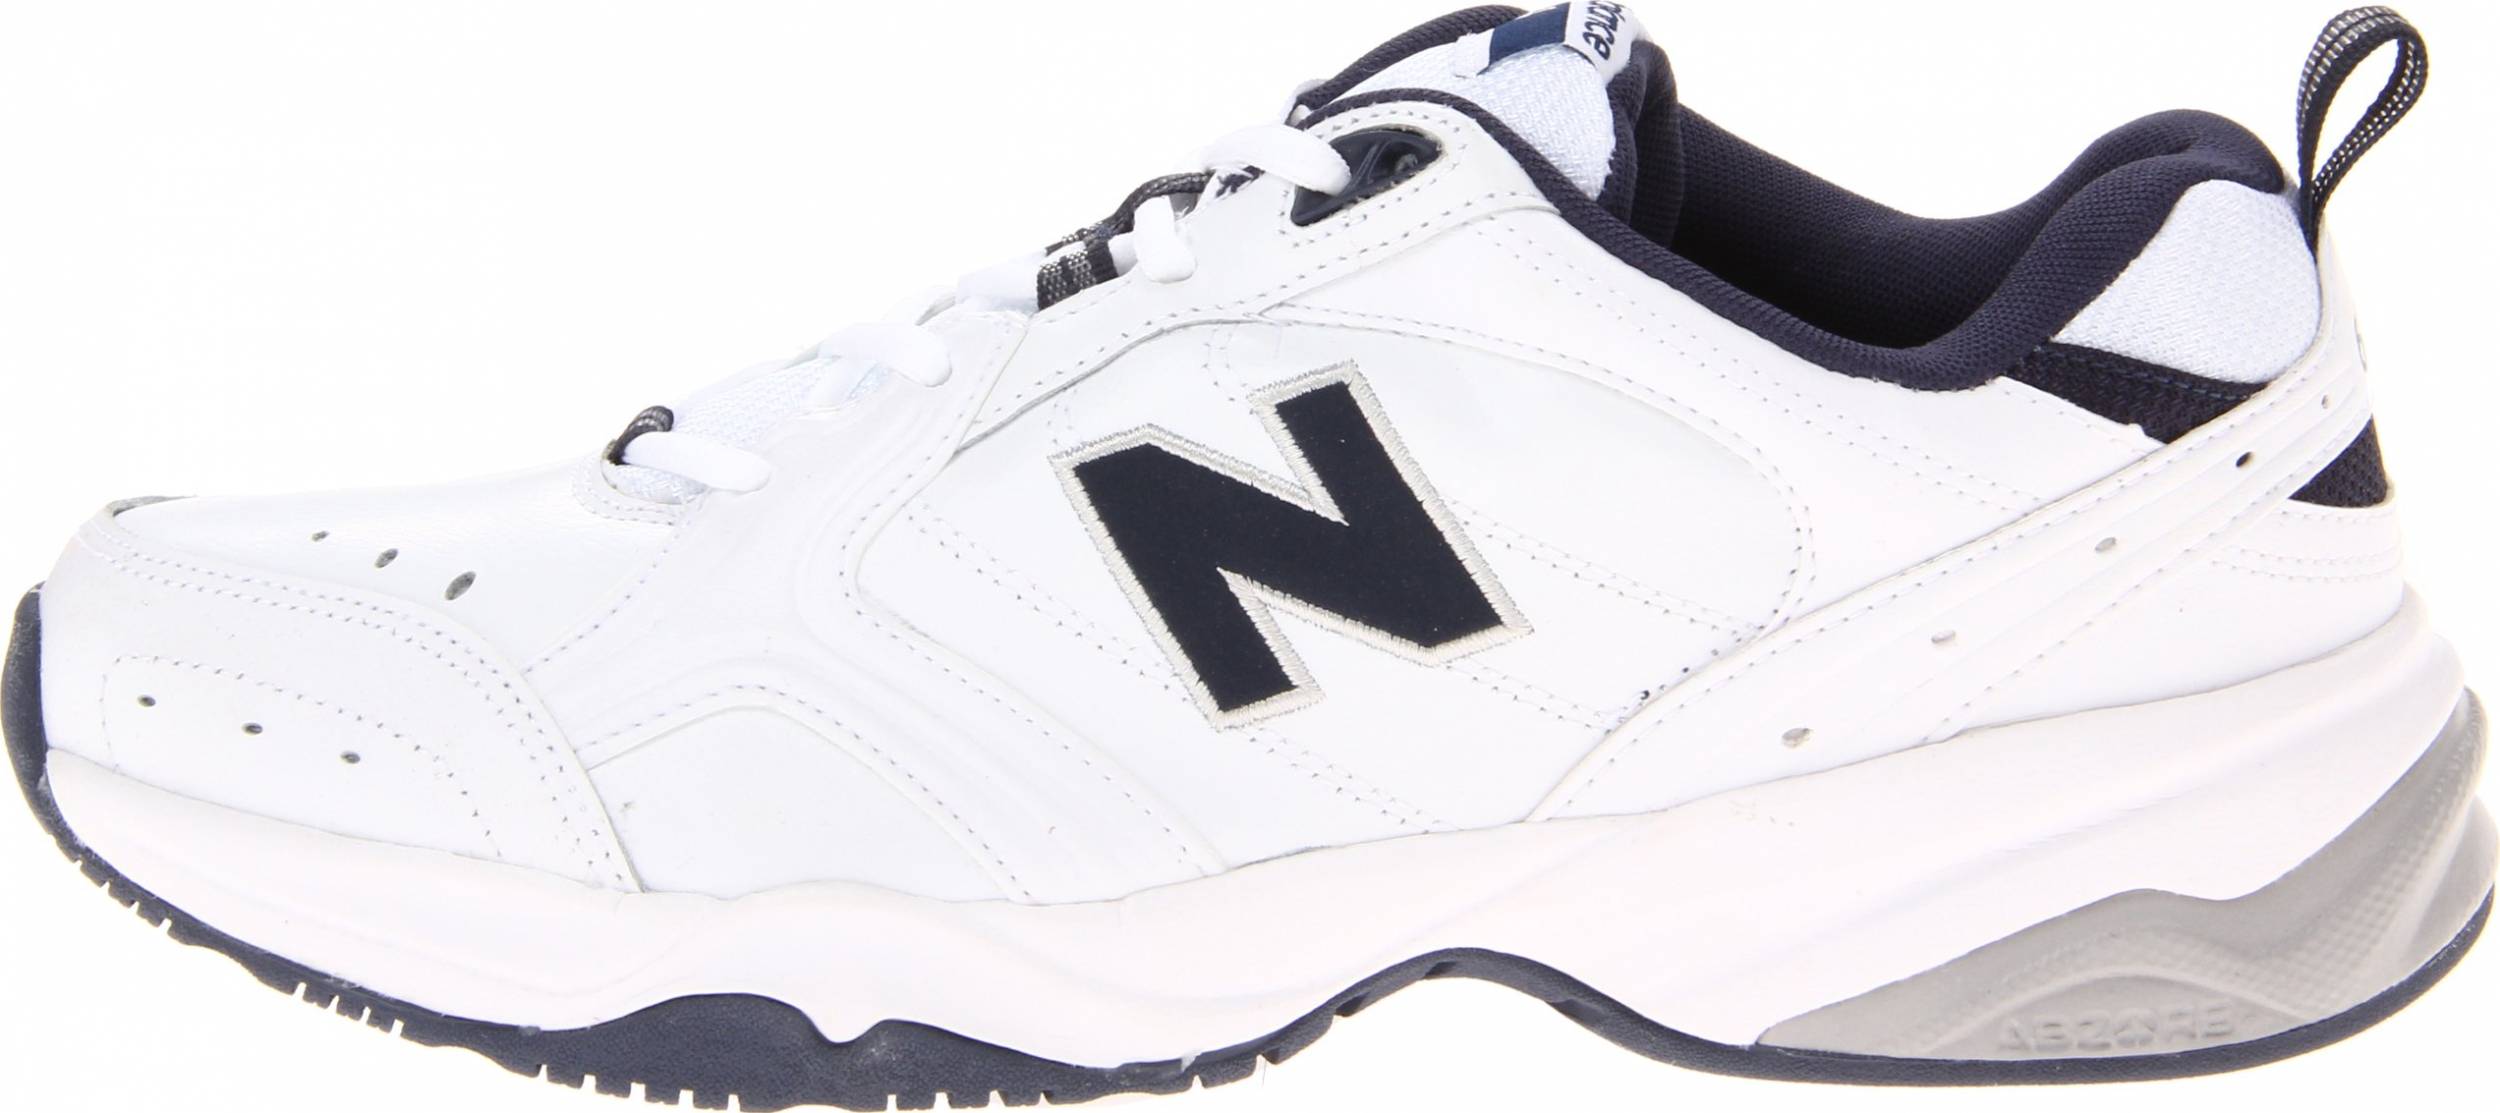 Only £39 + Review of New Balance 624 